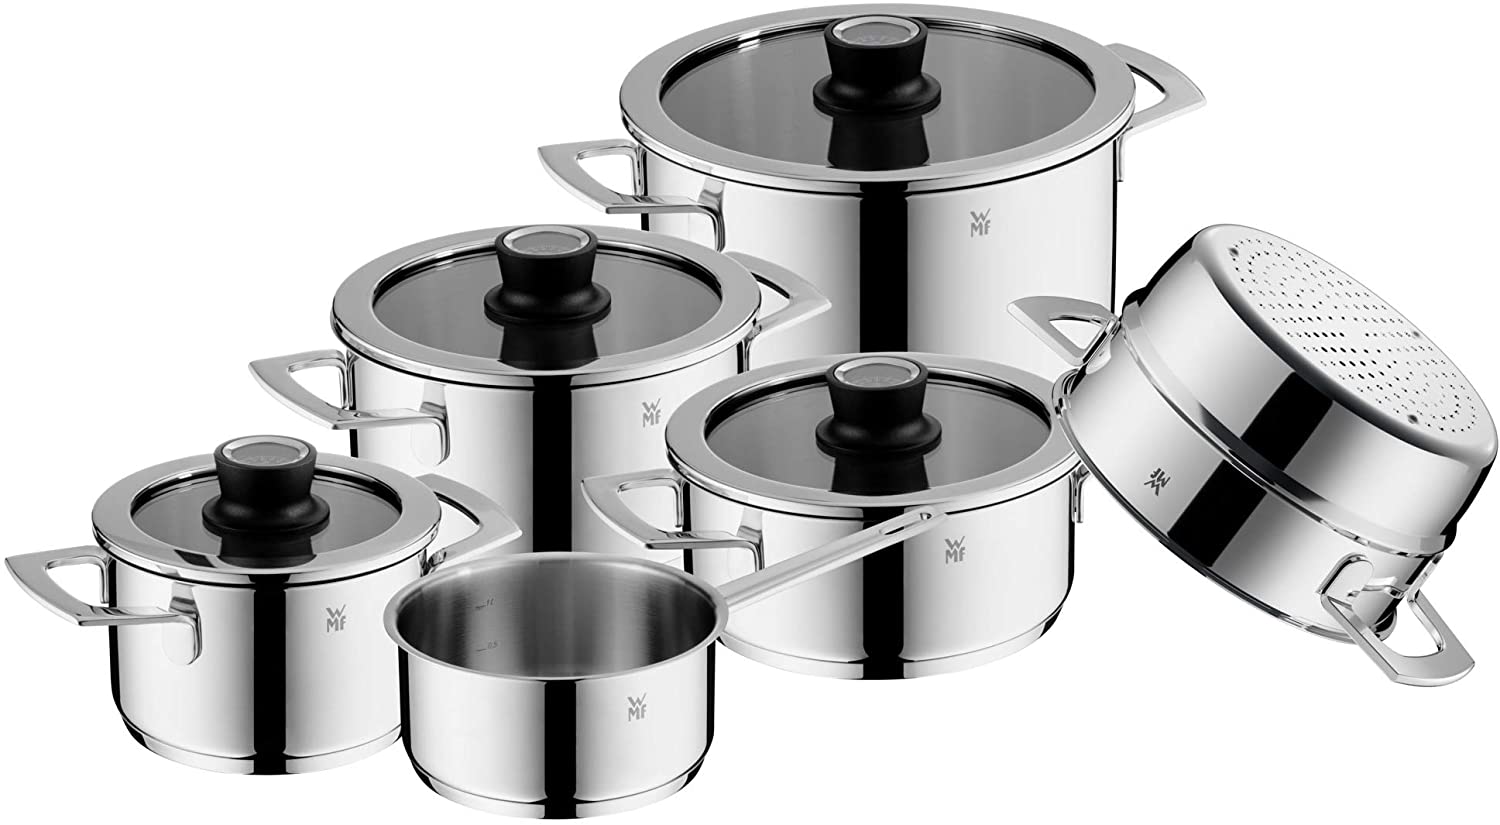 WMF VarioCuisine 6-Piece Induction Saucepan Set with Silence Glass Lid, Polished Cromargan Stainless Steel, Thermometer, Pots Set Uncoated